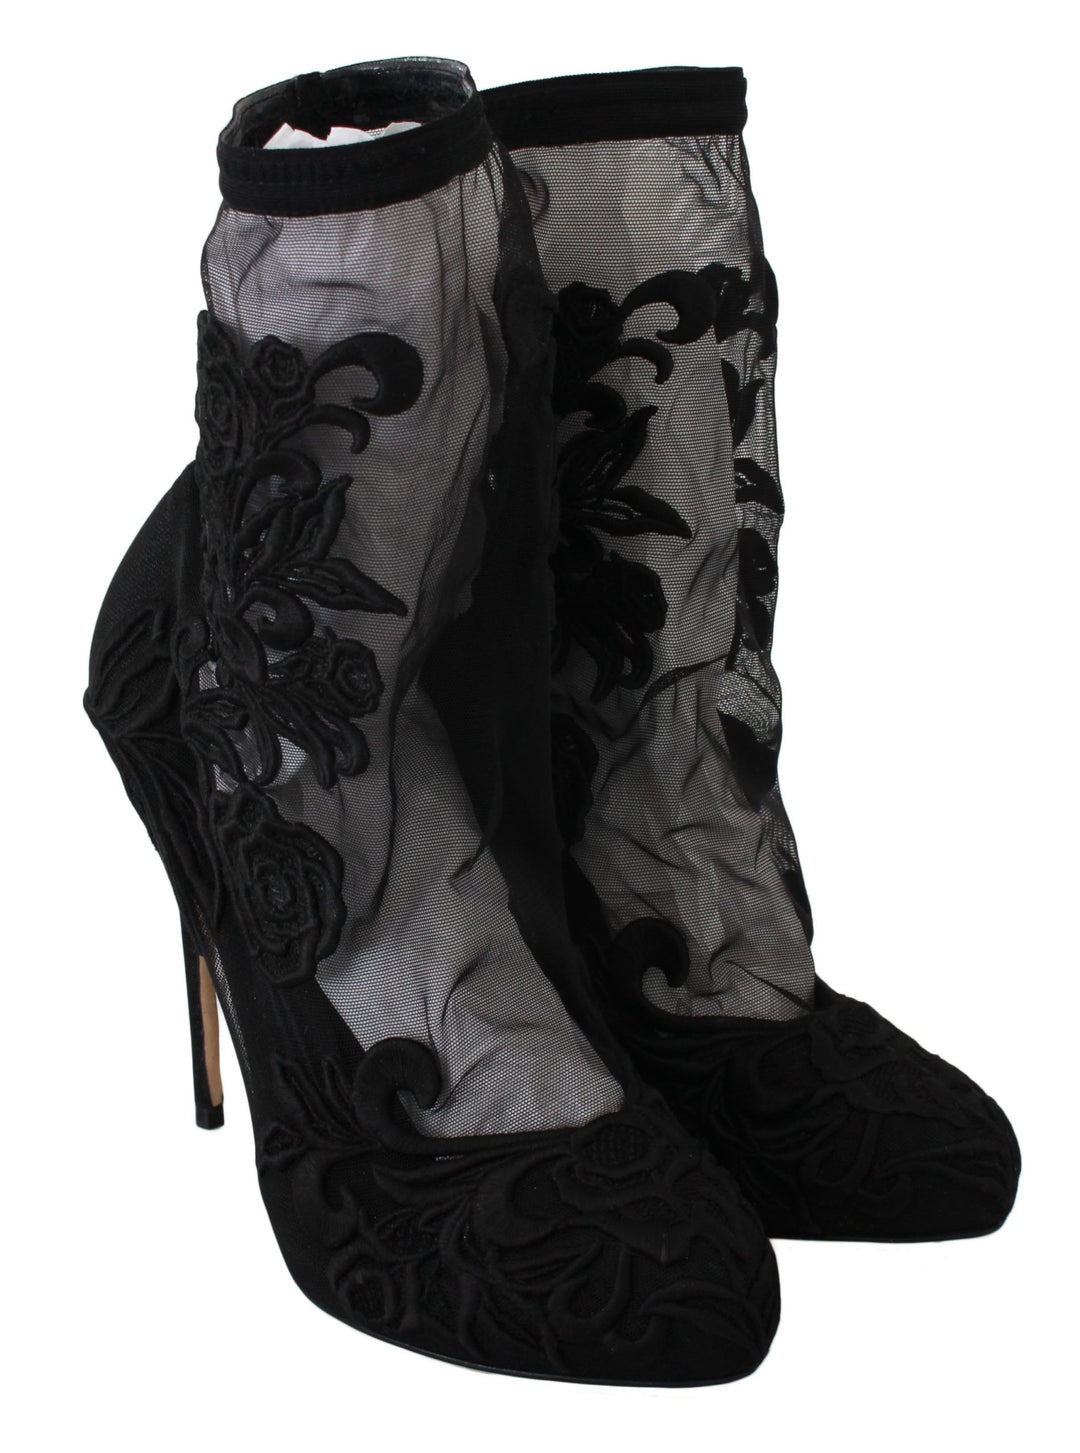 Dolce & Gabbana Embroidered Floral Stiletto Socks Booties